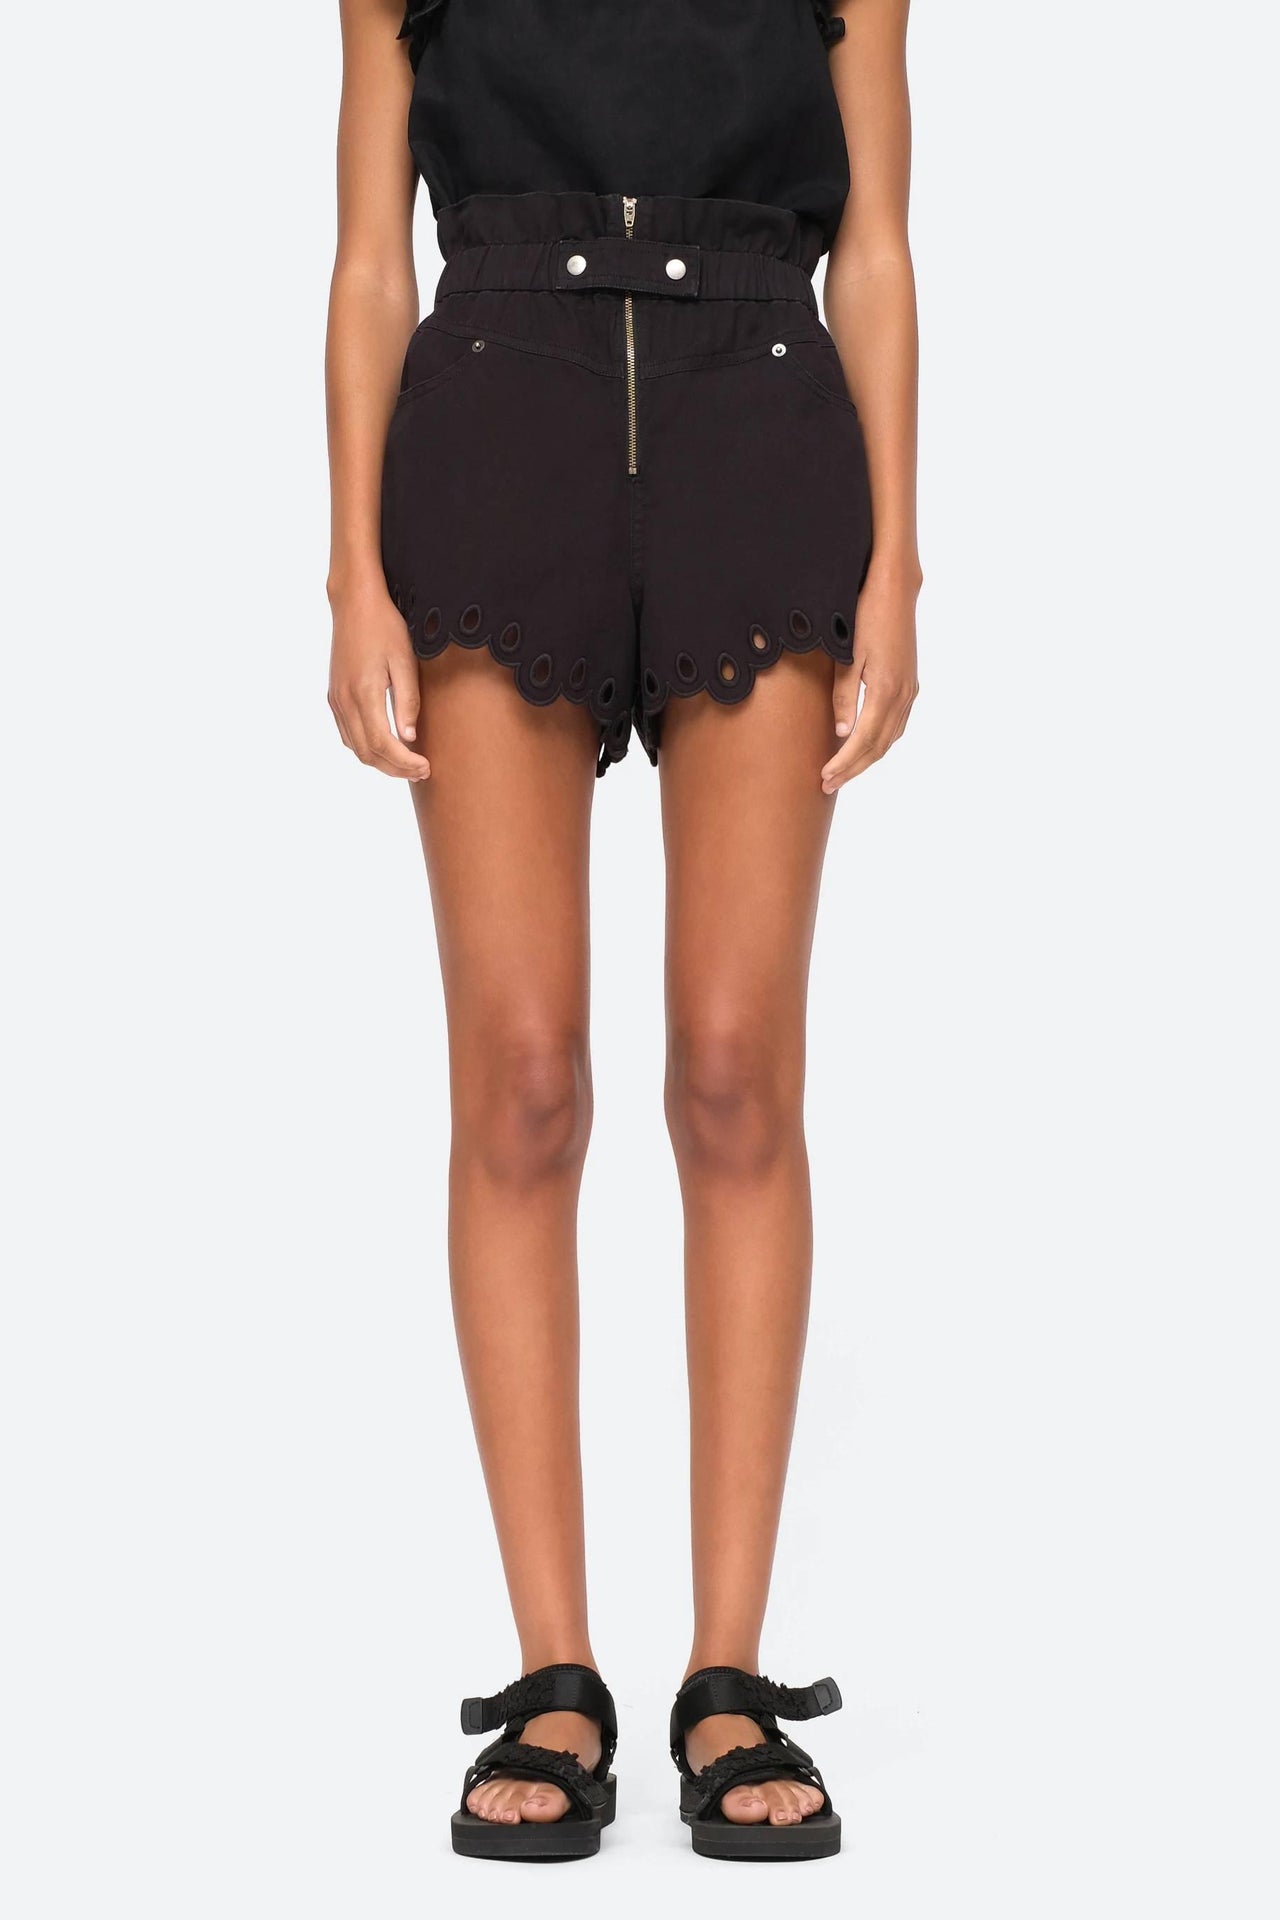 Lee Embroidery Short in Black-Short-Sea New York-Debs Boutique